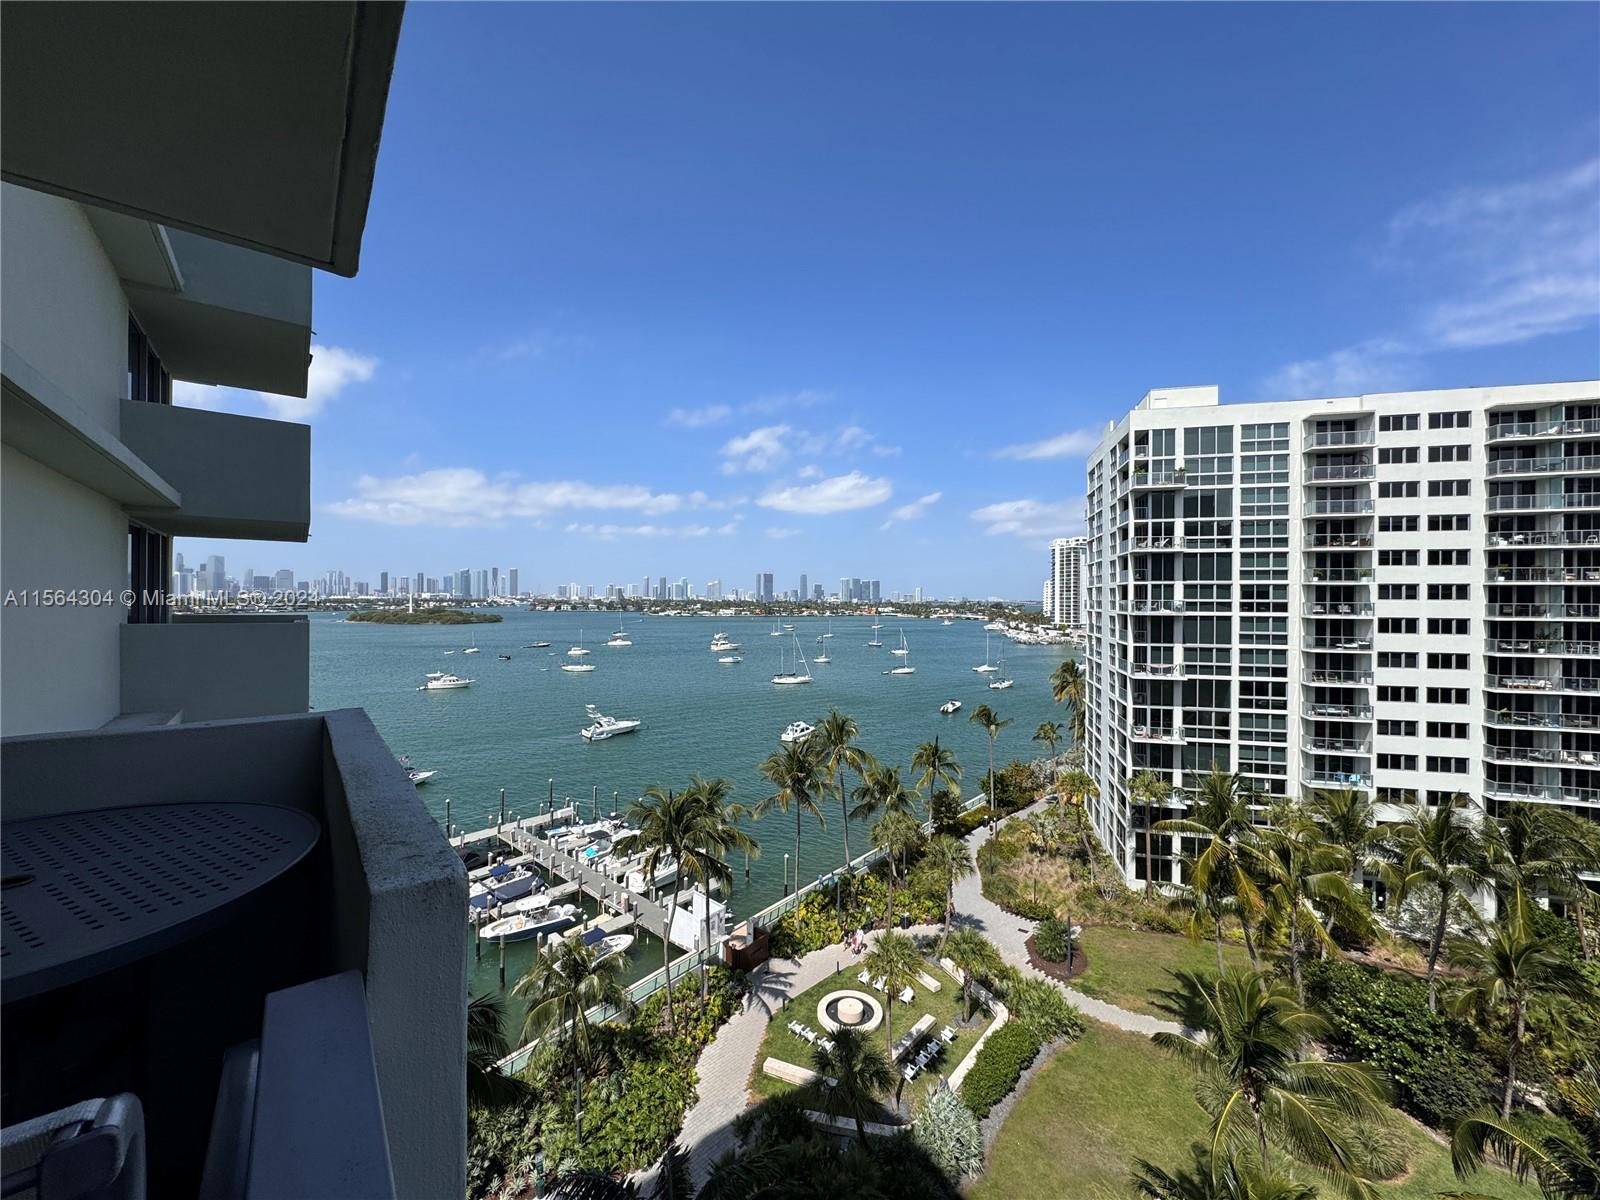 Beautiful 1Br/1B At Flamingo South Tower! Unit Comes Fully Furnished; Includes Internet & 2 Gym Memberships. Unit Is Available For Short Term Or Long Term Tenants; Prices Will Vary On Seasonal Or Off Seasonal Rental. Centrally Located Near Trader Joes, Whole Foods, Publix , Lincon Rd And All Major Restaurants. Walking Distance to The Beach, With Amazing Sunsets Overlooking The Bay